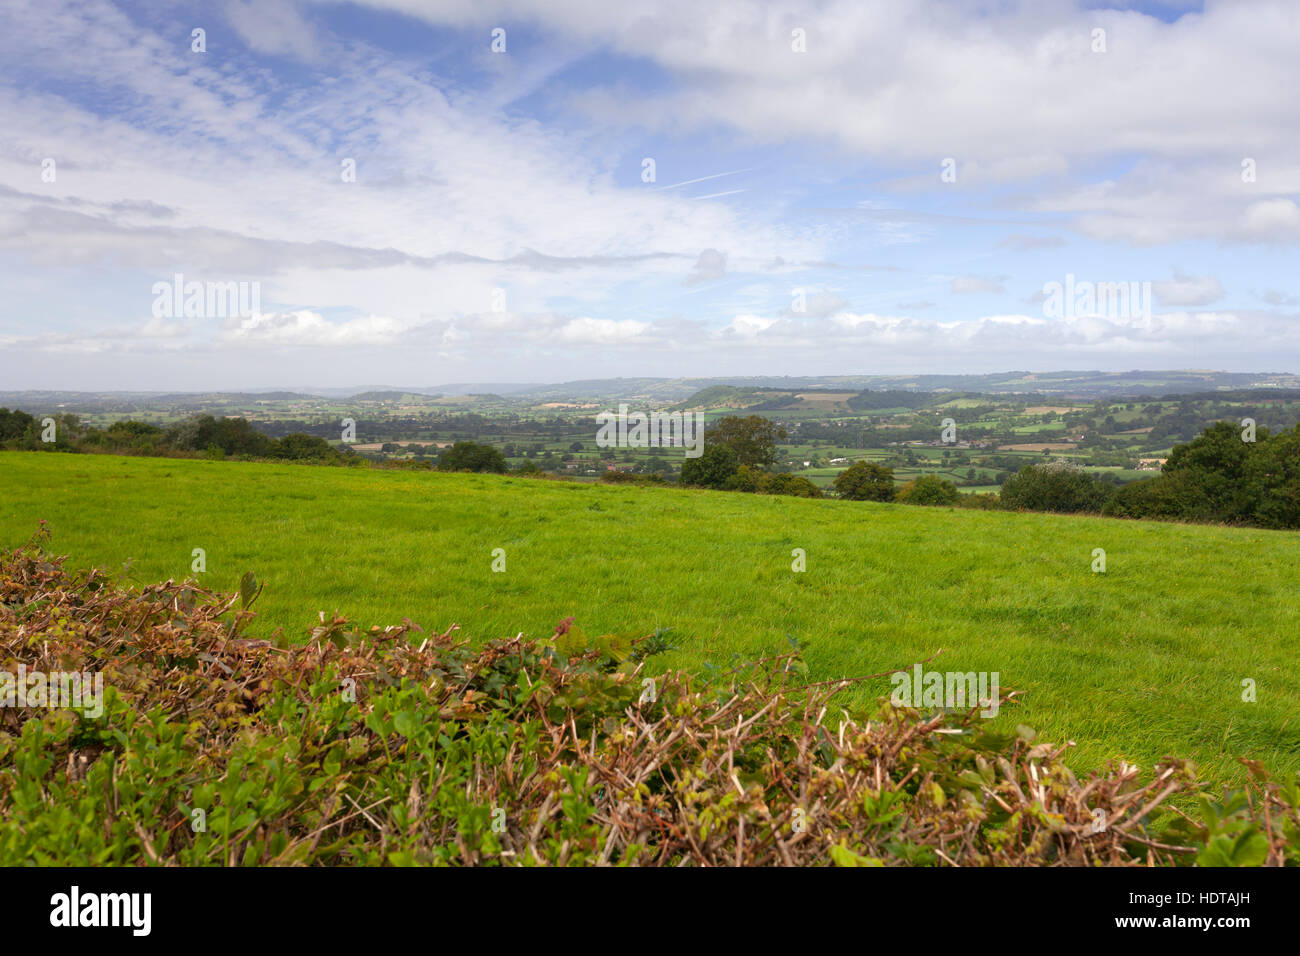 Looking towards North Wooton, Sticklinch and Glastonbury Tor from the hill at Pennard Hill Farm, Pilton, Somerset, UK Stock Photo